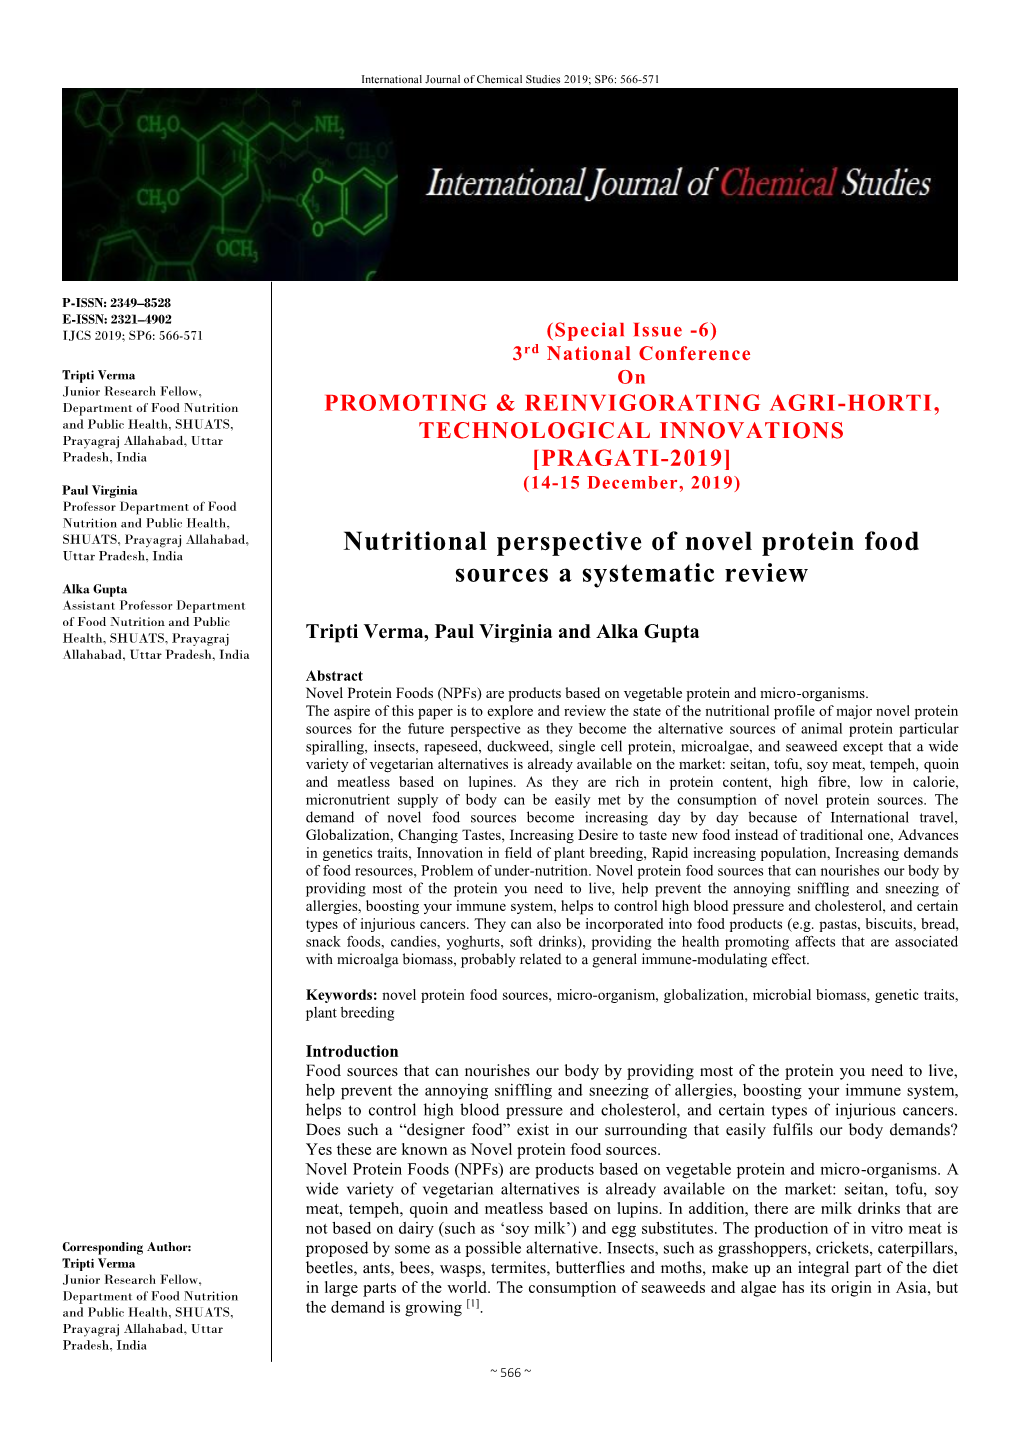 Nutritional Perspective of Novel Protein Food Sources a Systematic Review